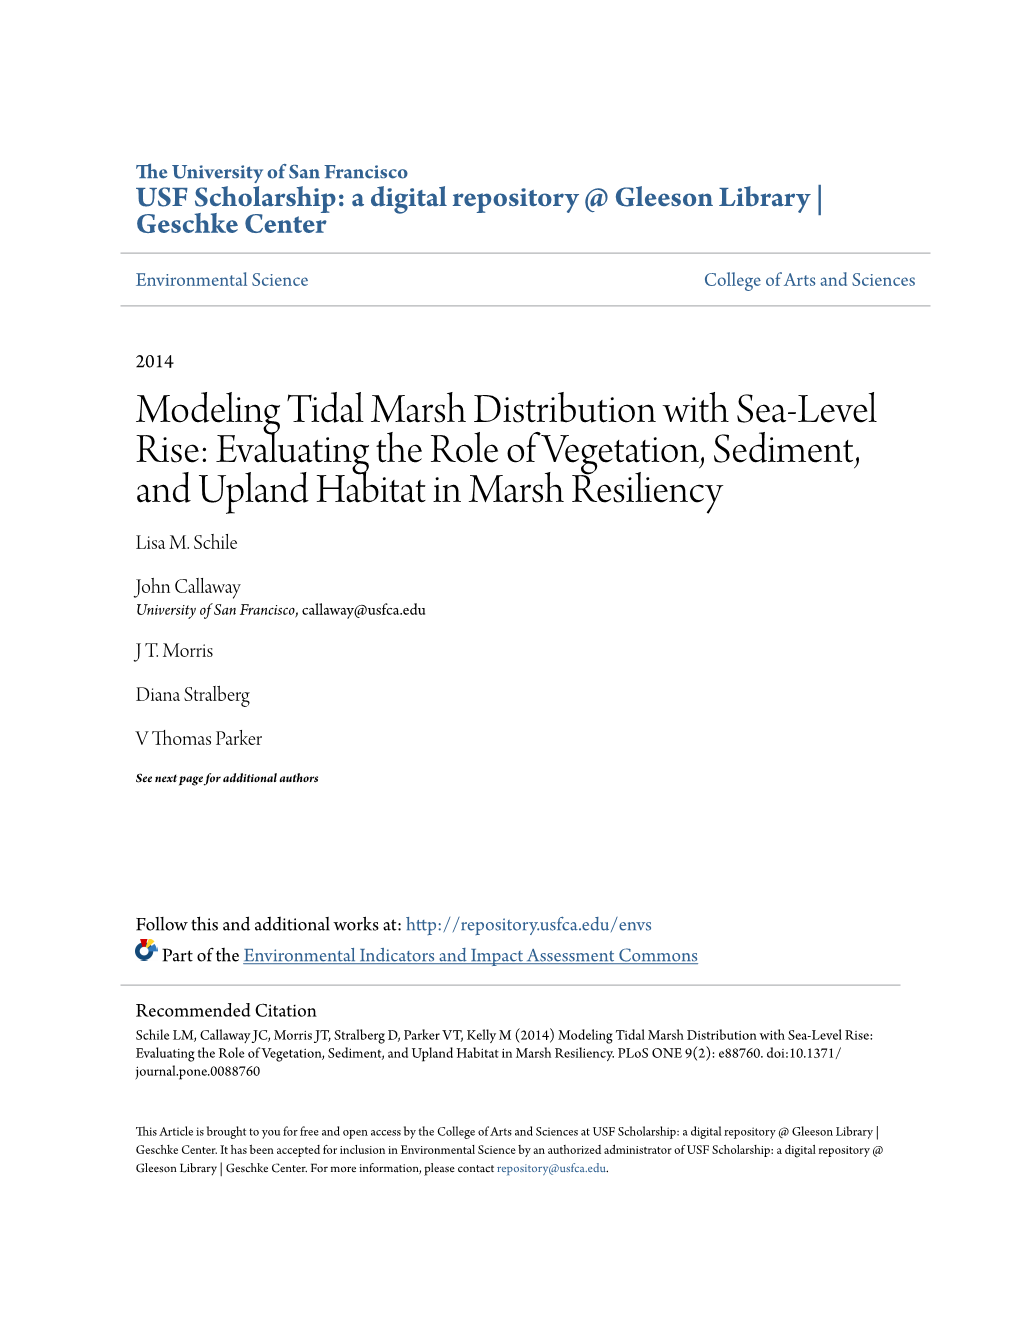 Modeling Tidal Marsh Distribution with Sea-Level Rise: Evaluating the Role of Vegetation, Sediment, and Upland Habitat in Marsh Resiliency Lisa M